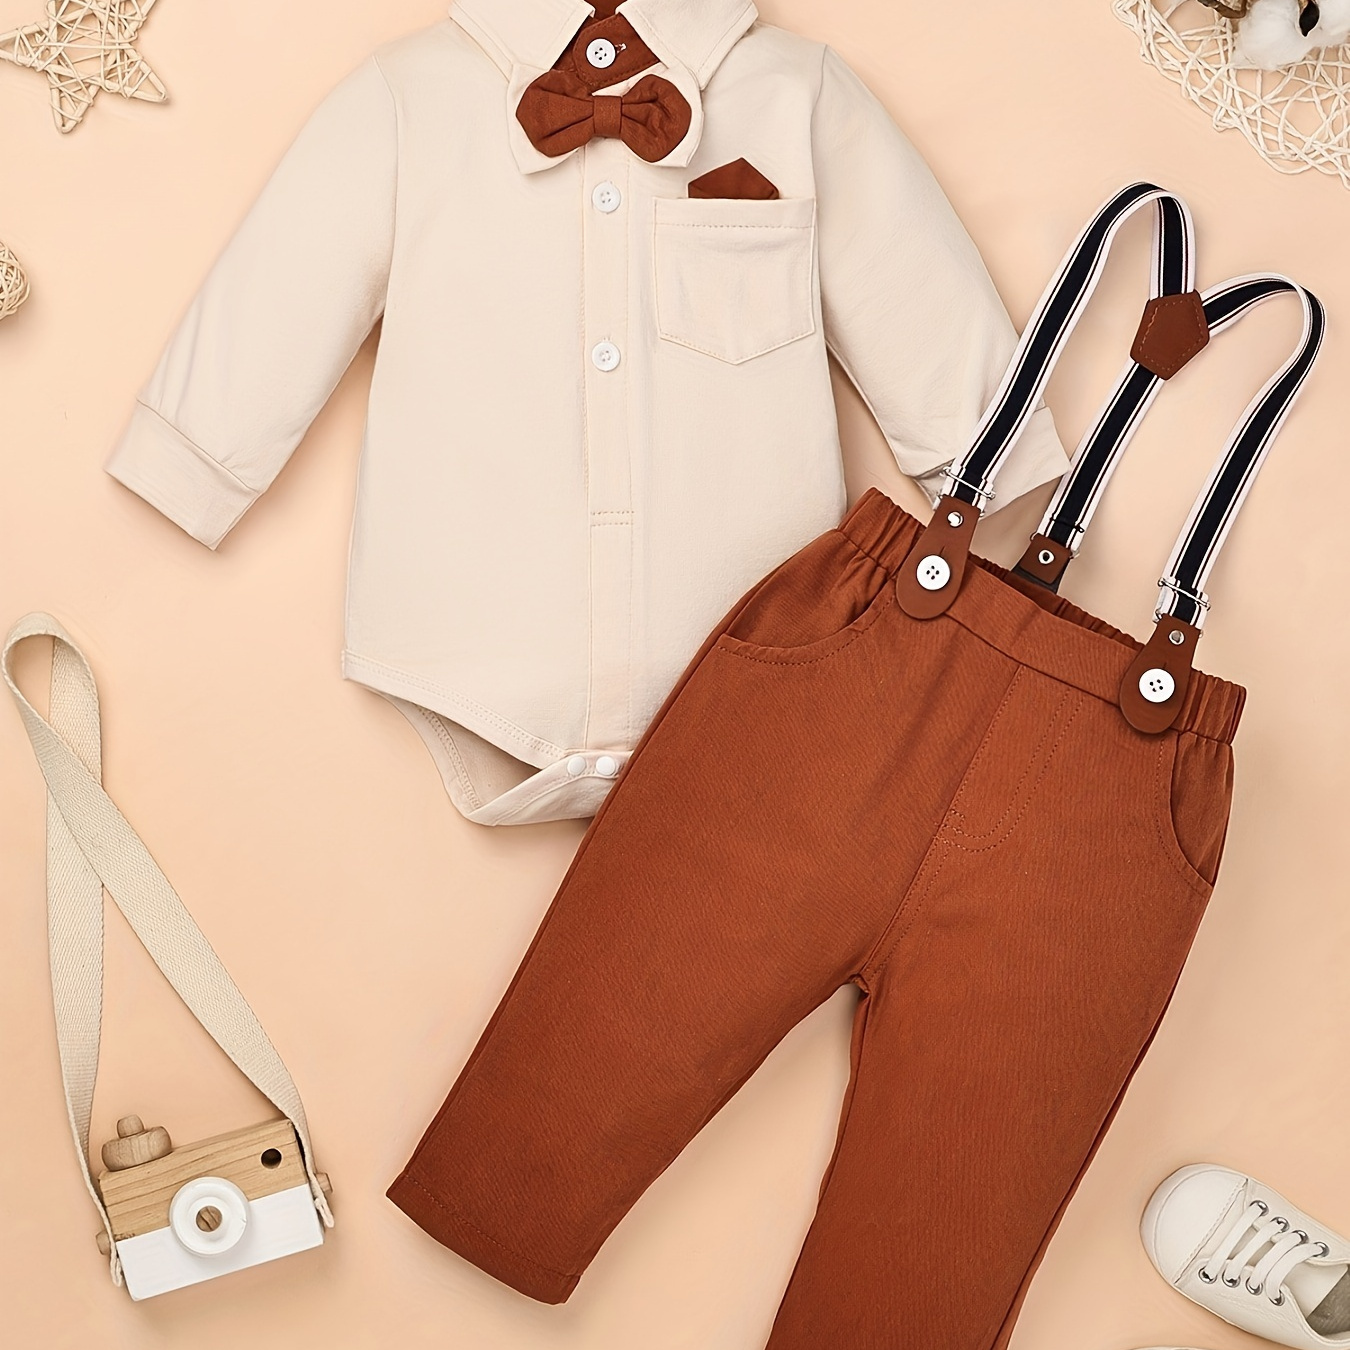 

Baby Boys Stylish Outfits, Little Gentleman 3pcs Long Sleeve Shirt Romper + Strap Pocket Pants + Bowtie Casual Party Set 0-18 Months